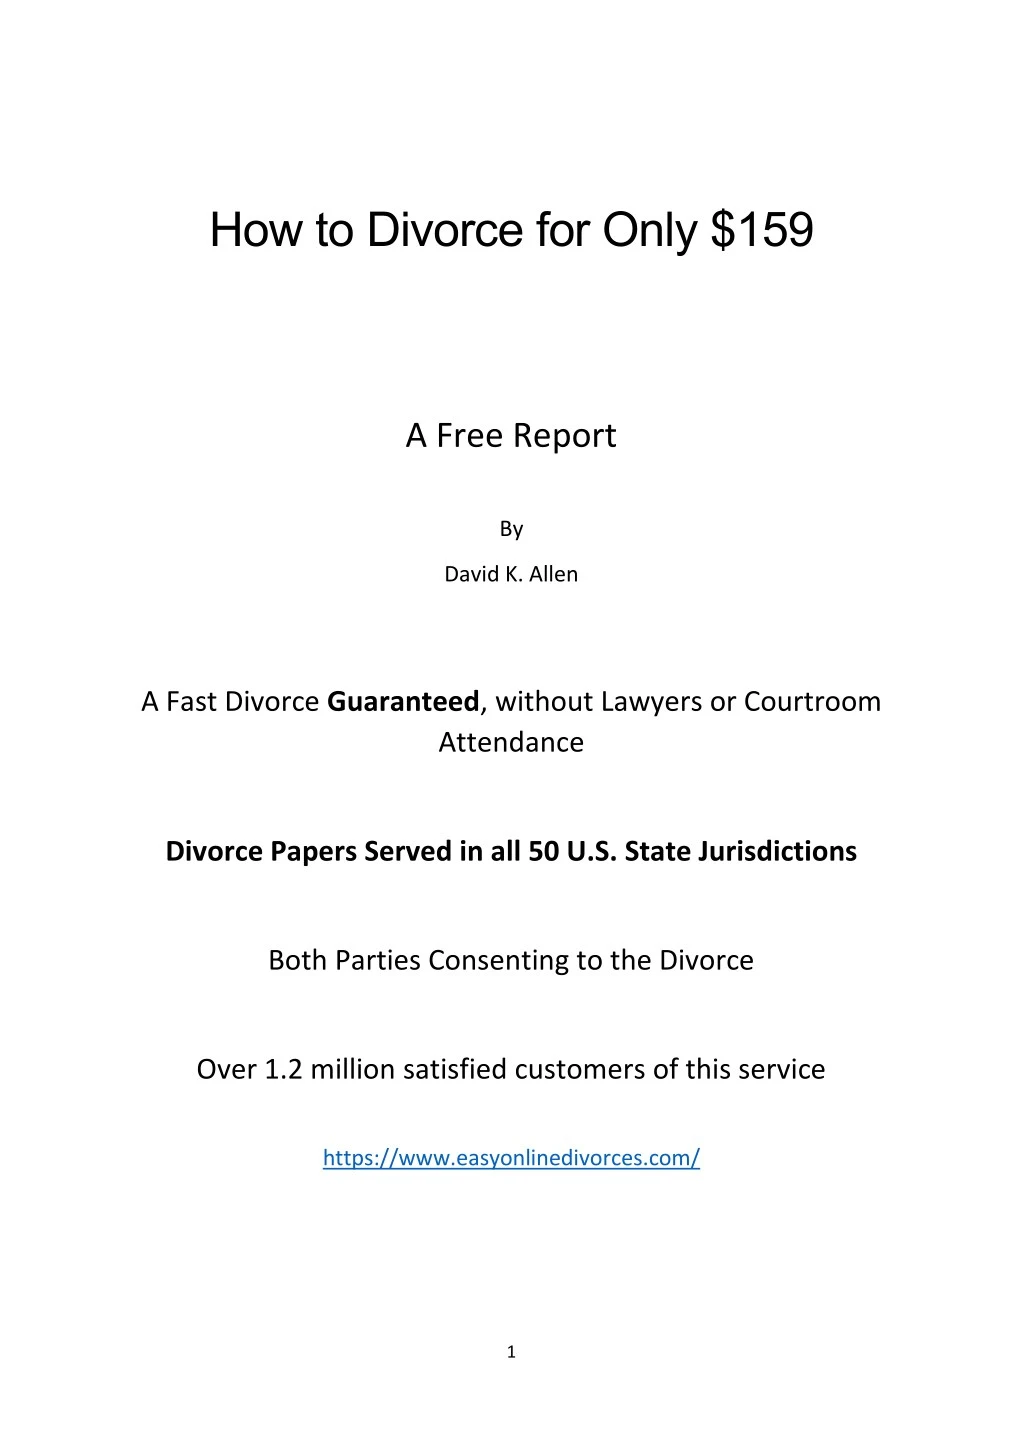 how to divorce for only 159